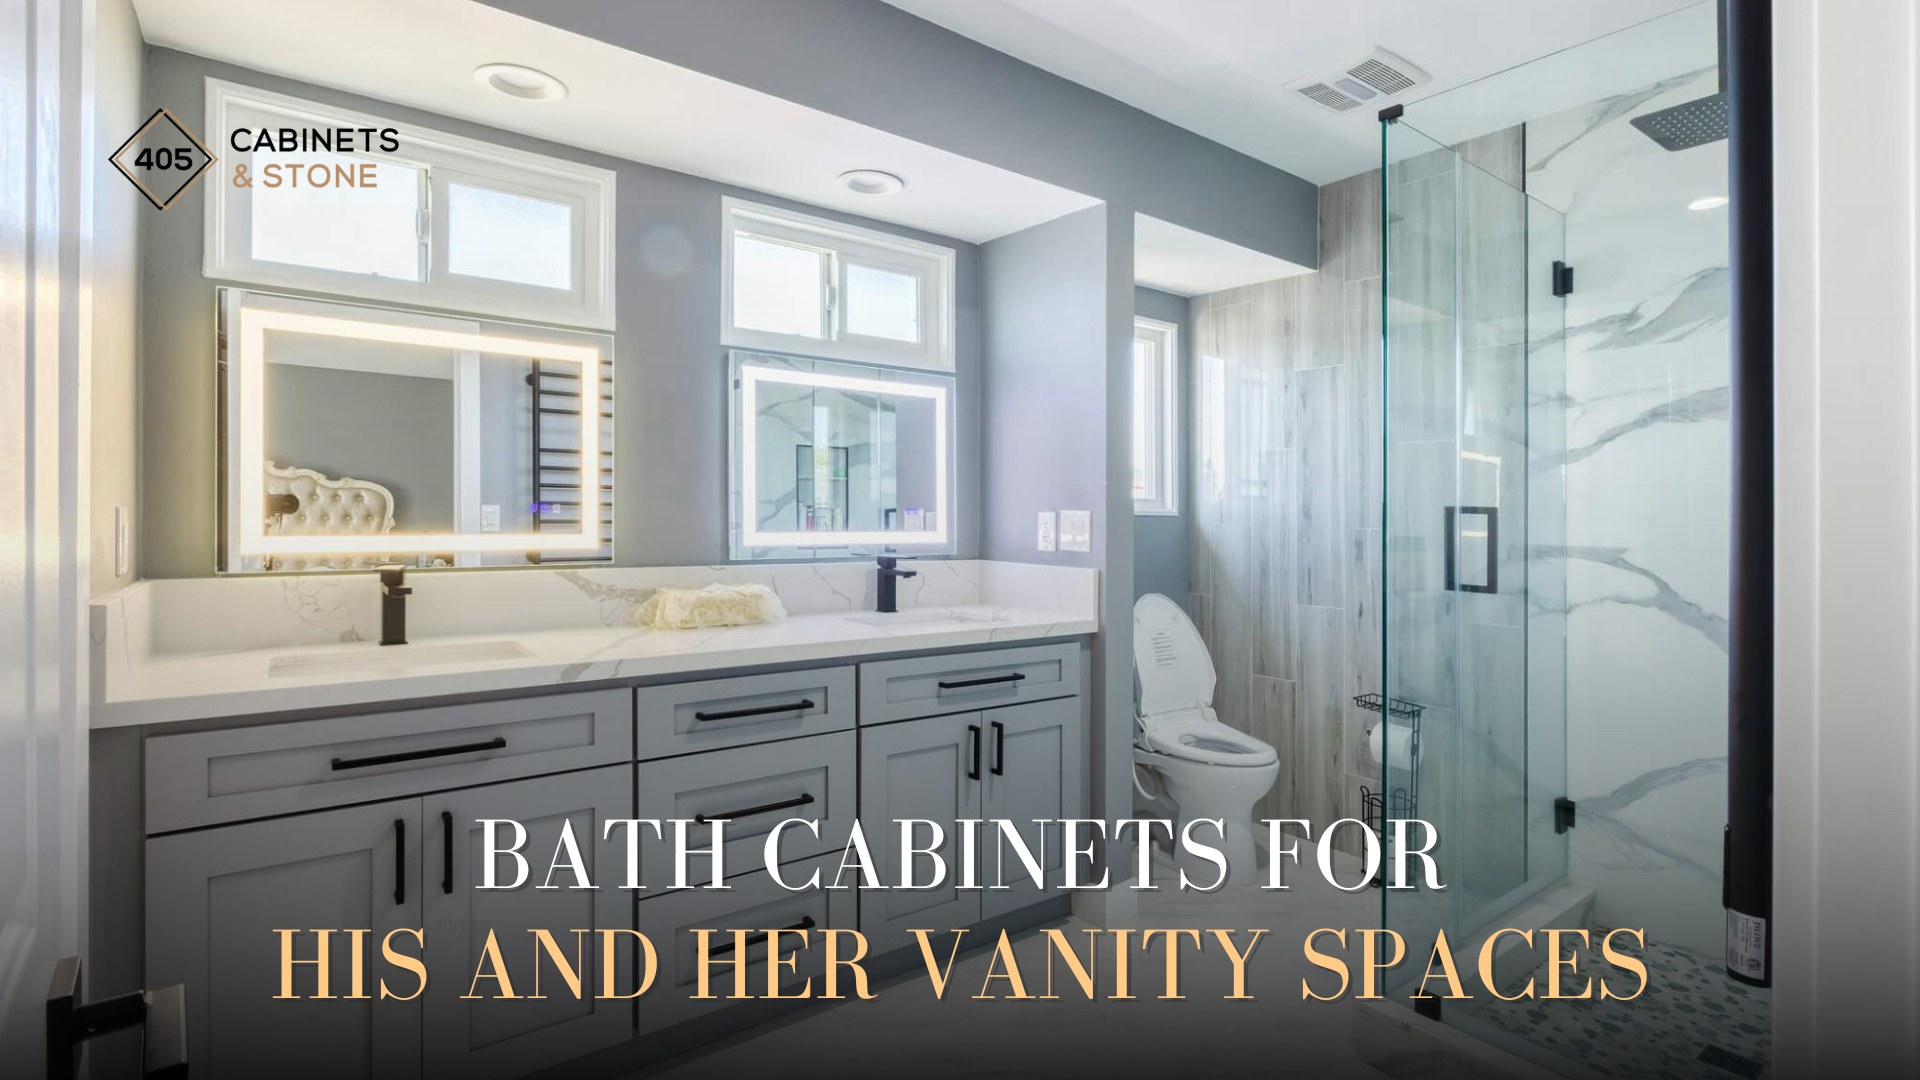 Bath Cabinets for His And Her Vanity Spaces